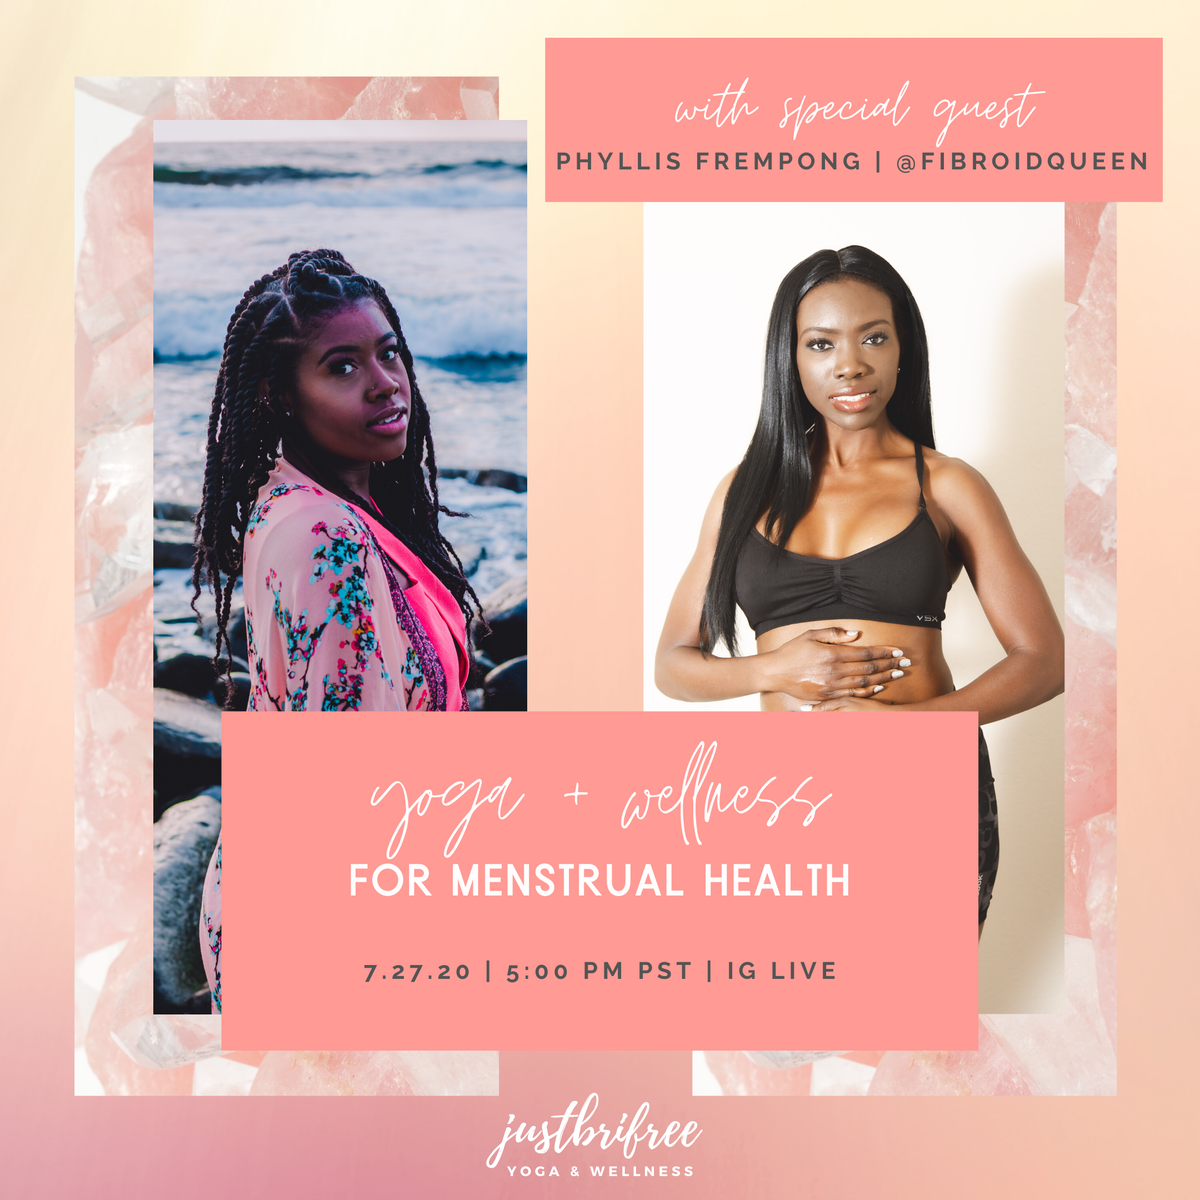 Yoga is great for #menstrualhealth, but did you know it can help heal #fibroids too? I'm going live on IG with the Fibroid Queen, Phyllis Frempong, on 7/27 to talk about how she healed herself. Phyllis is a nurse and fitness coach committing to helping others heal themselves.